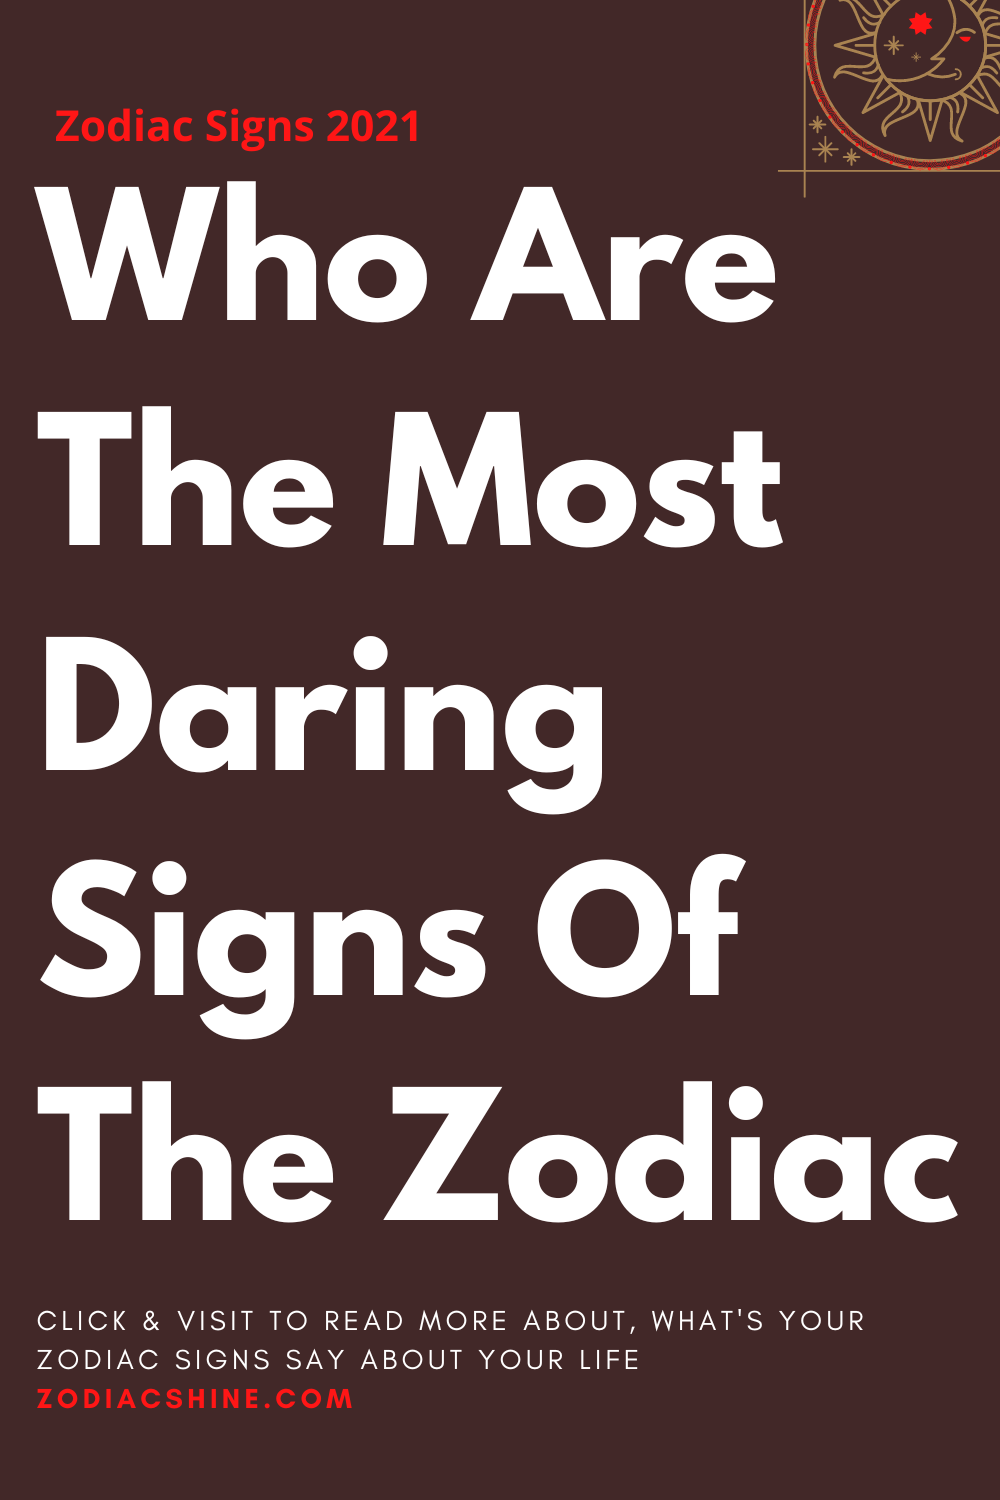 Who Are The Most Daring Signs Of The Zodiac